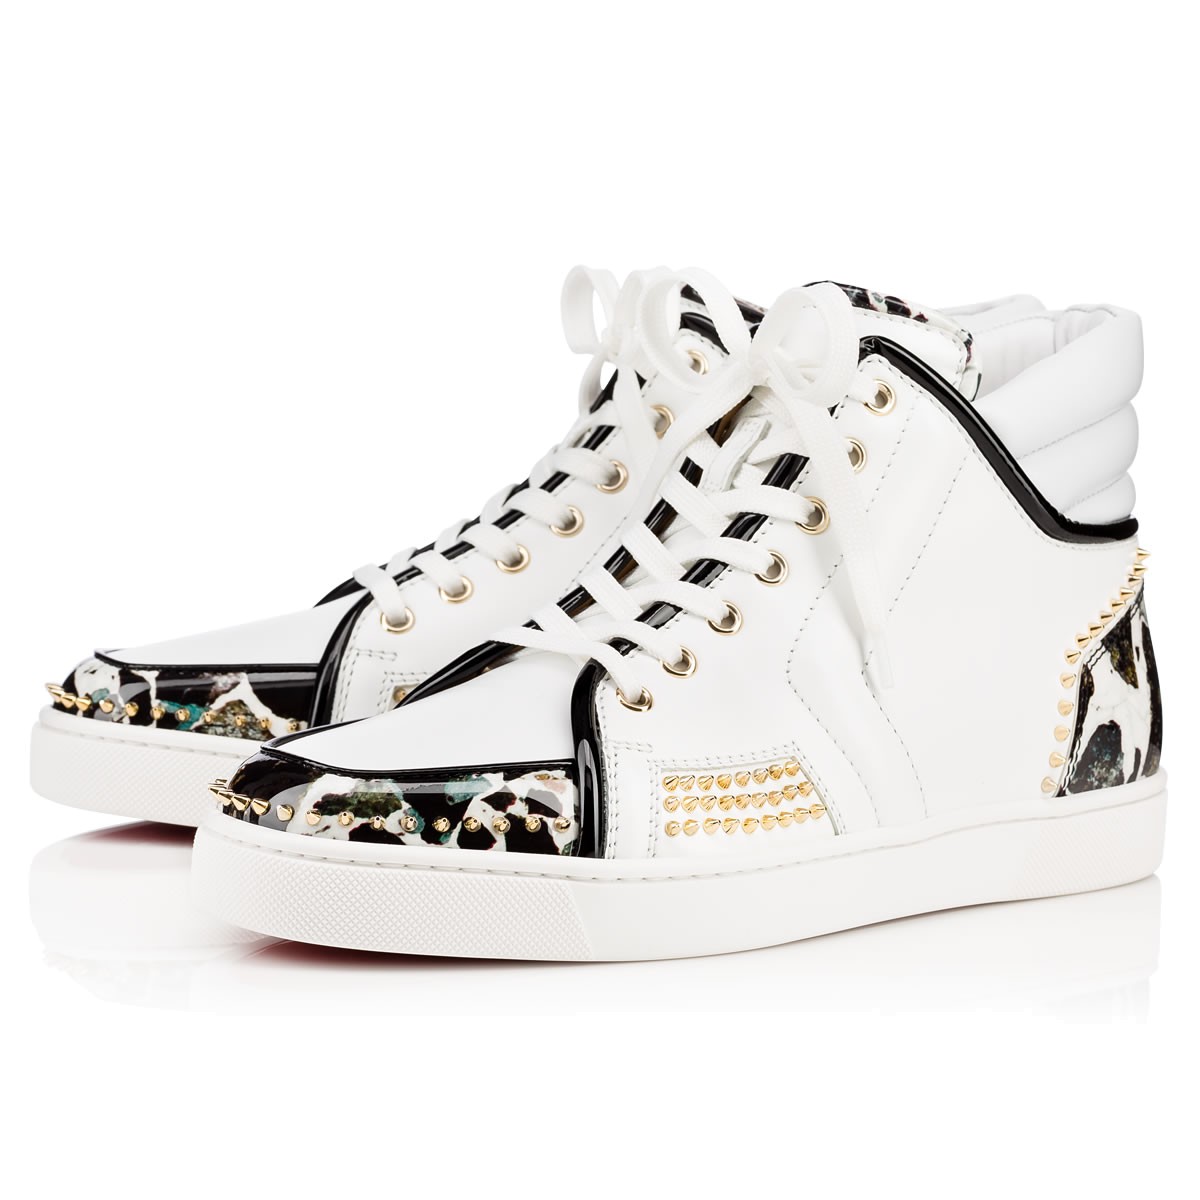 Christian Louboutin Sporty Dude Low Patent Carrare, Black And White ...